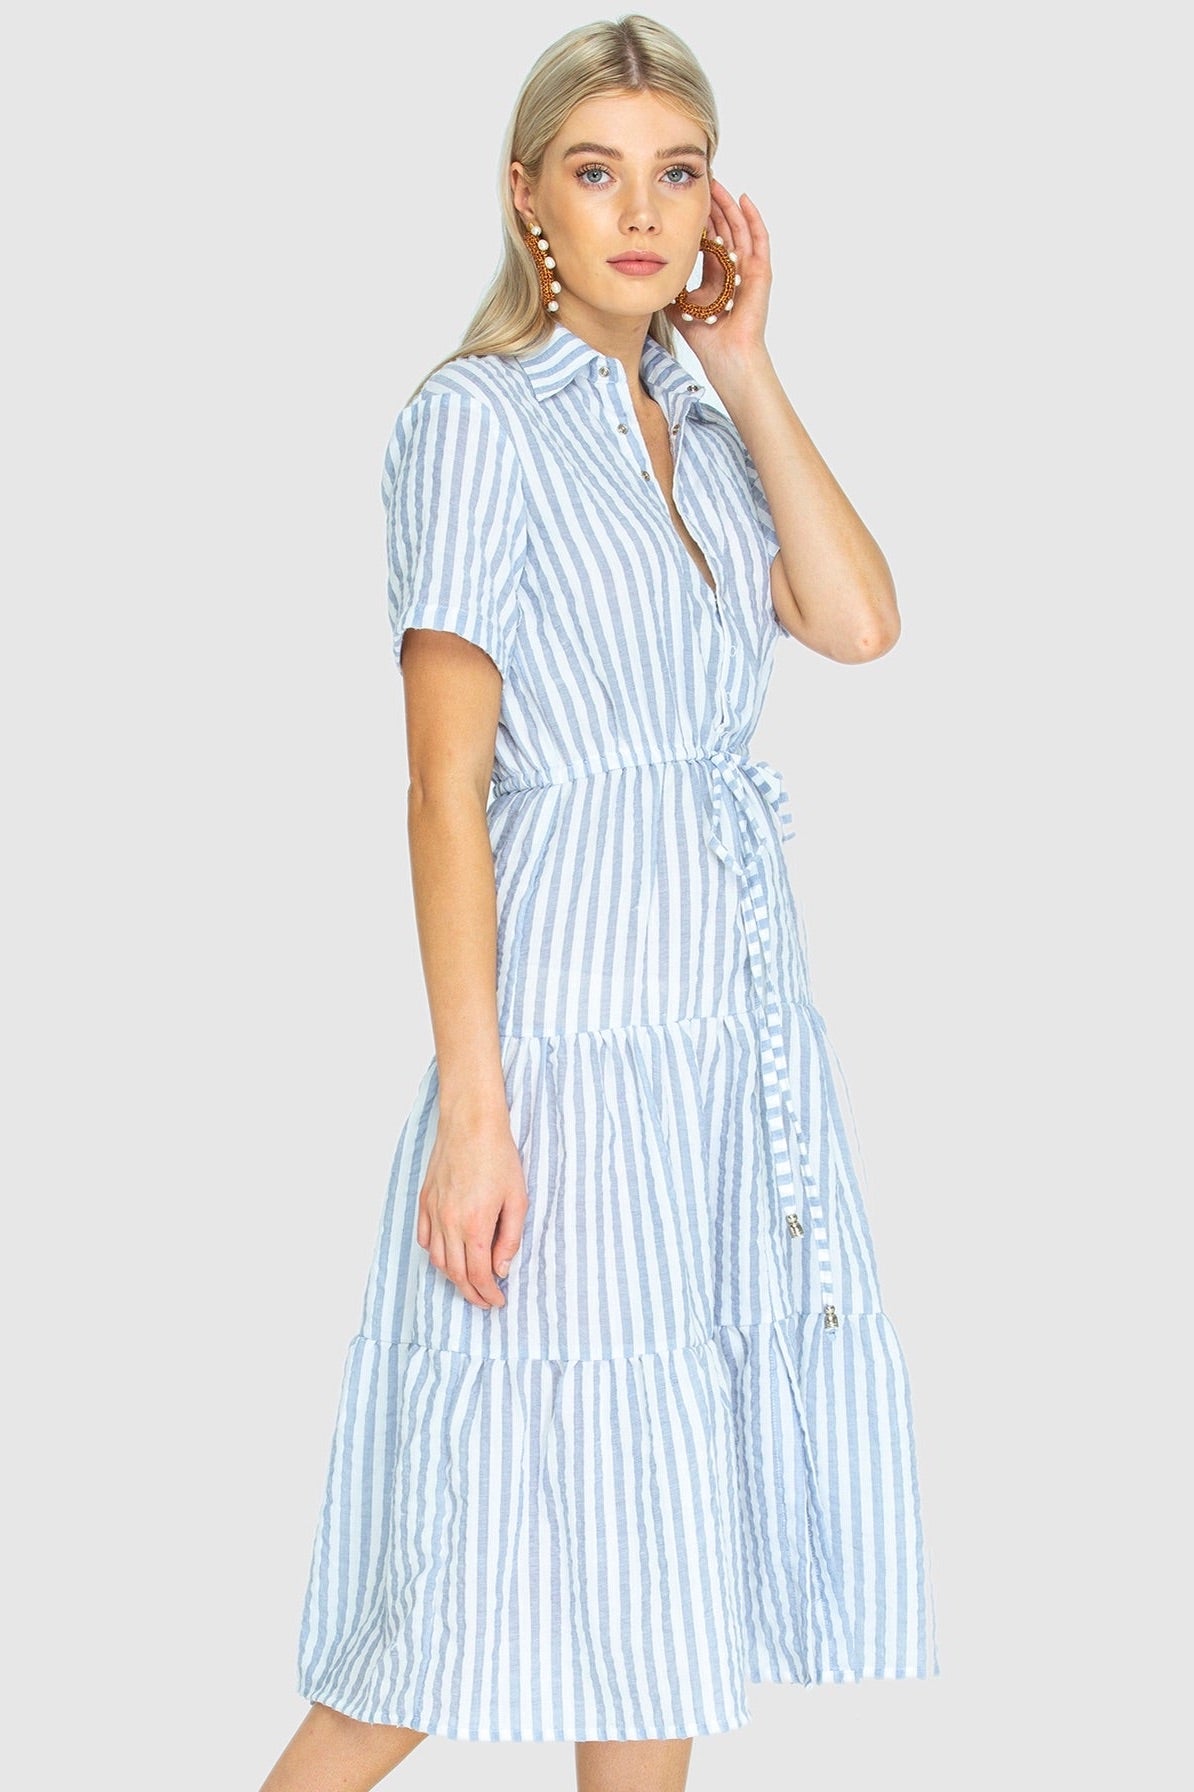 THE WALK IN THE PARK DRESS - Woven Stripe blue/white – State of Georgia